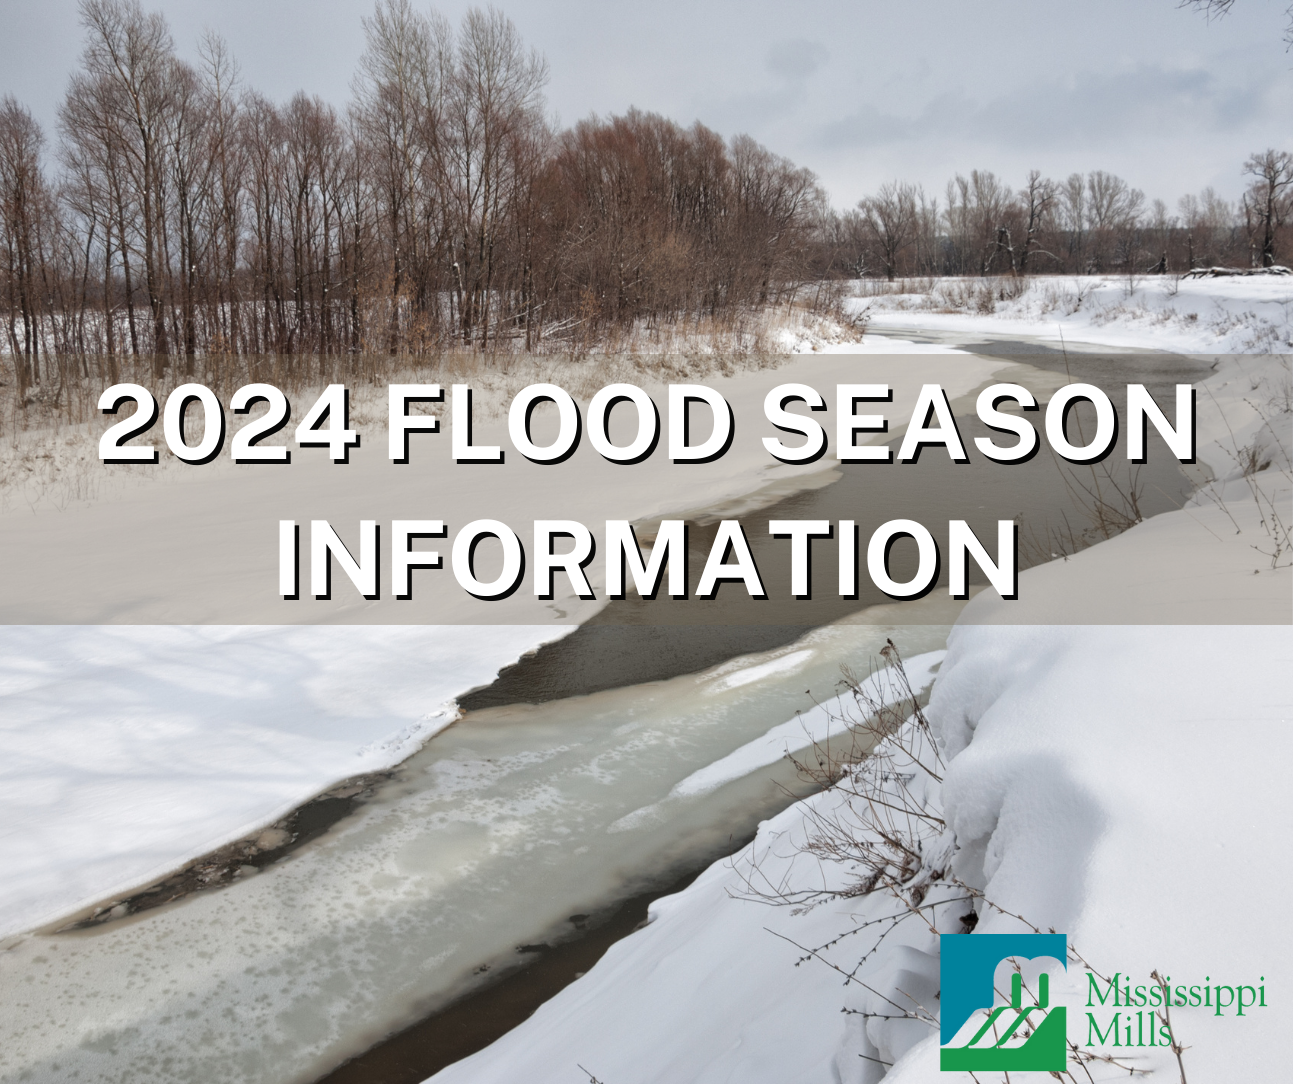 Photo of watercourse with melting ice and the text '2024 Flood Season Information'